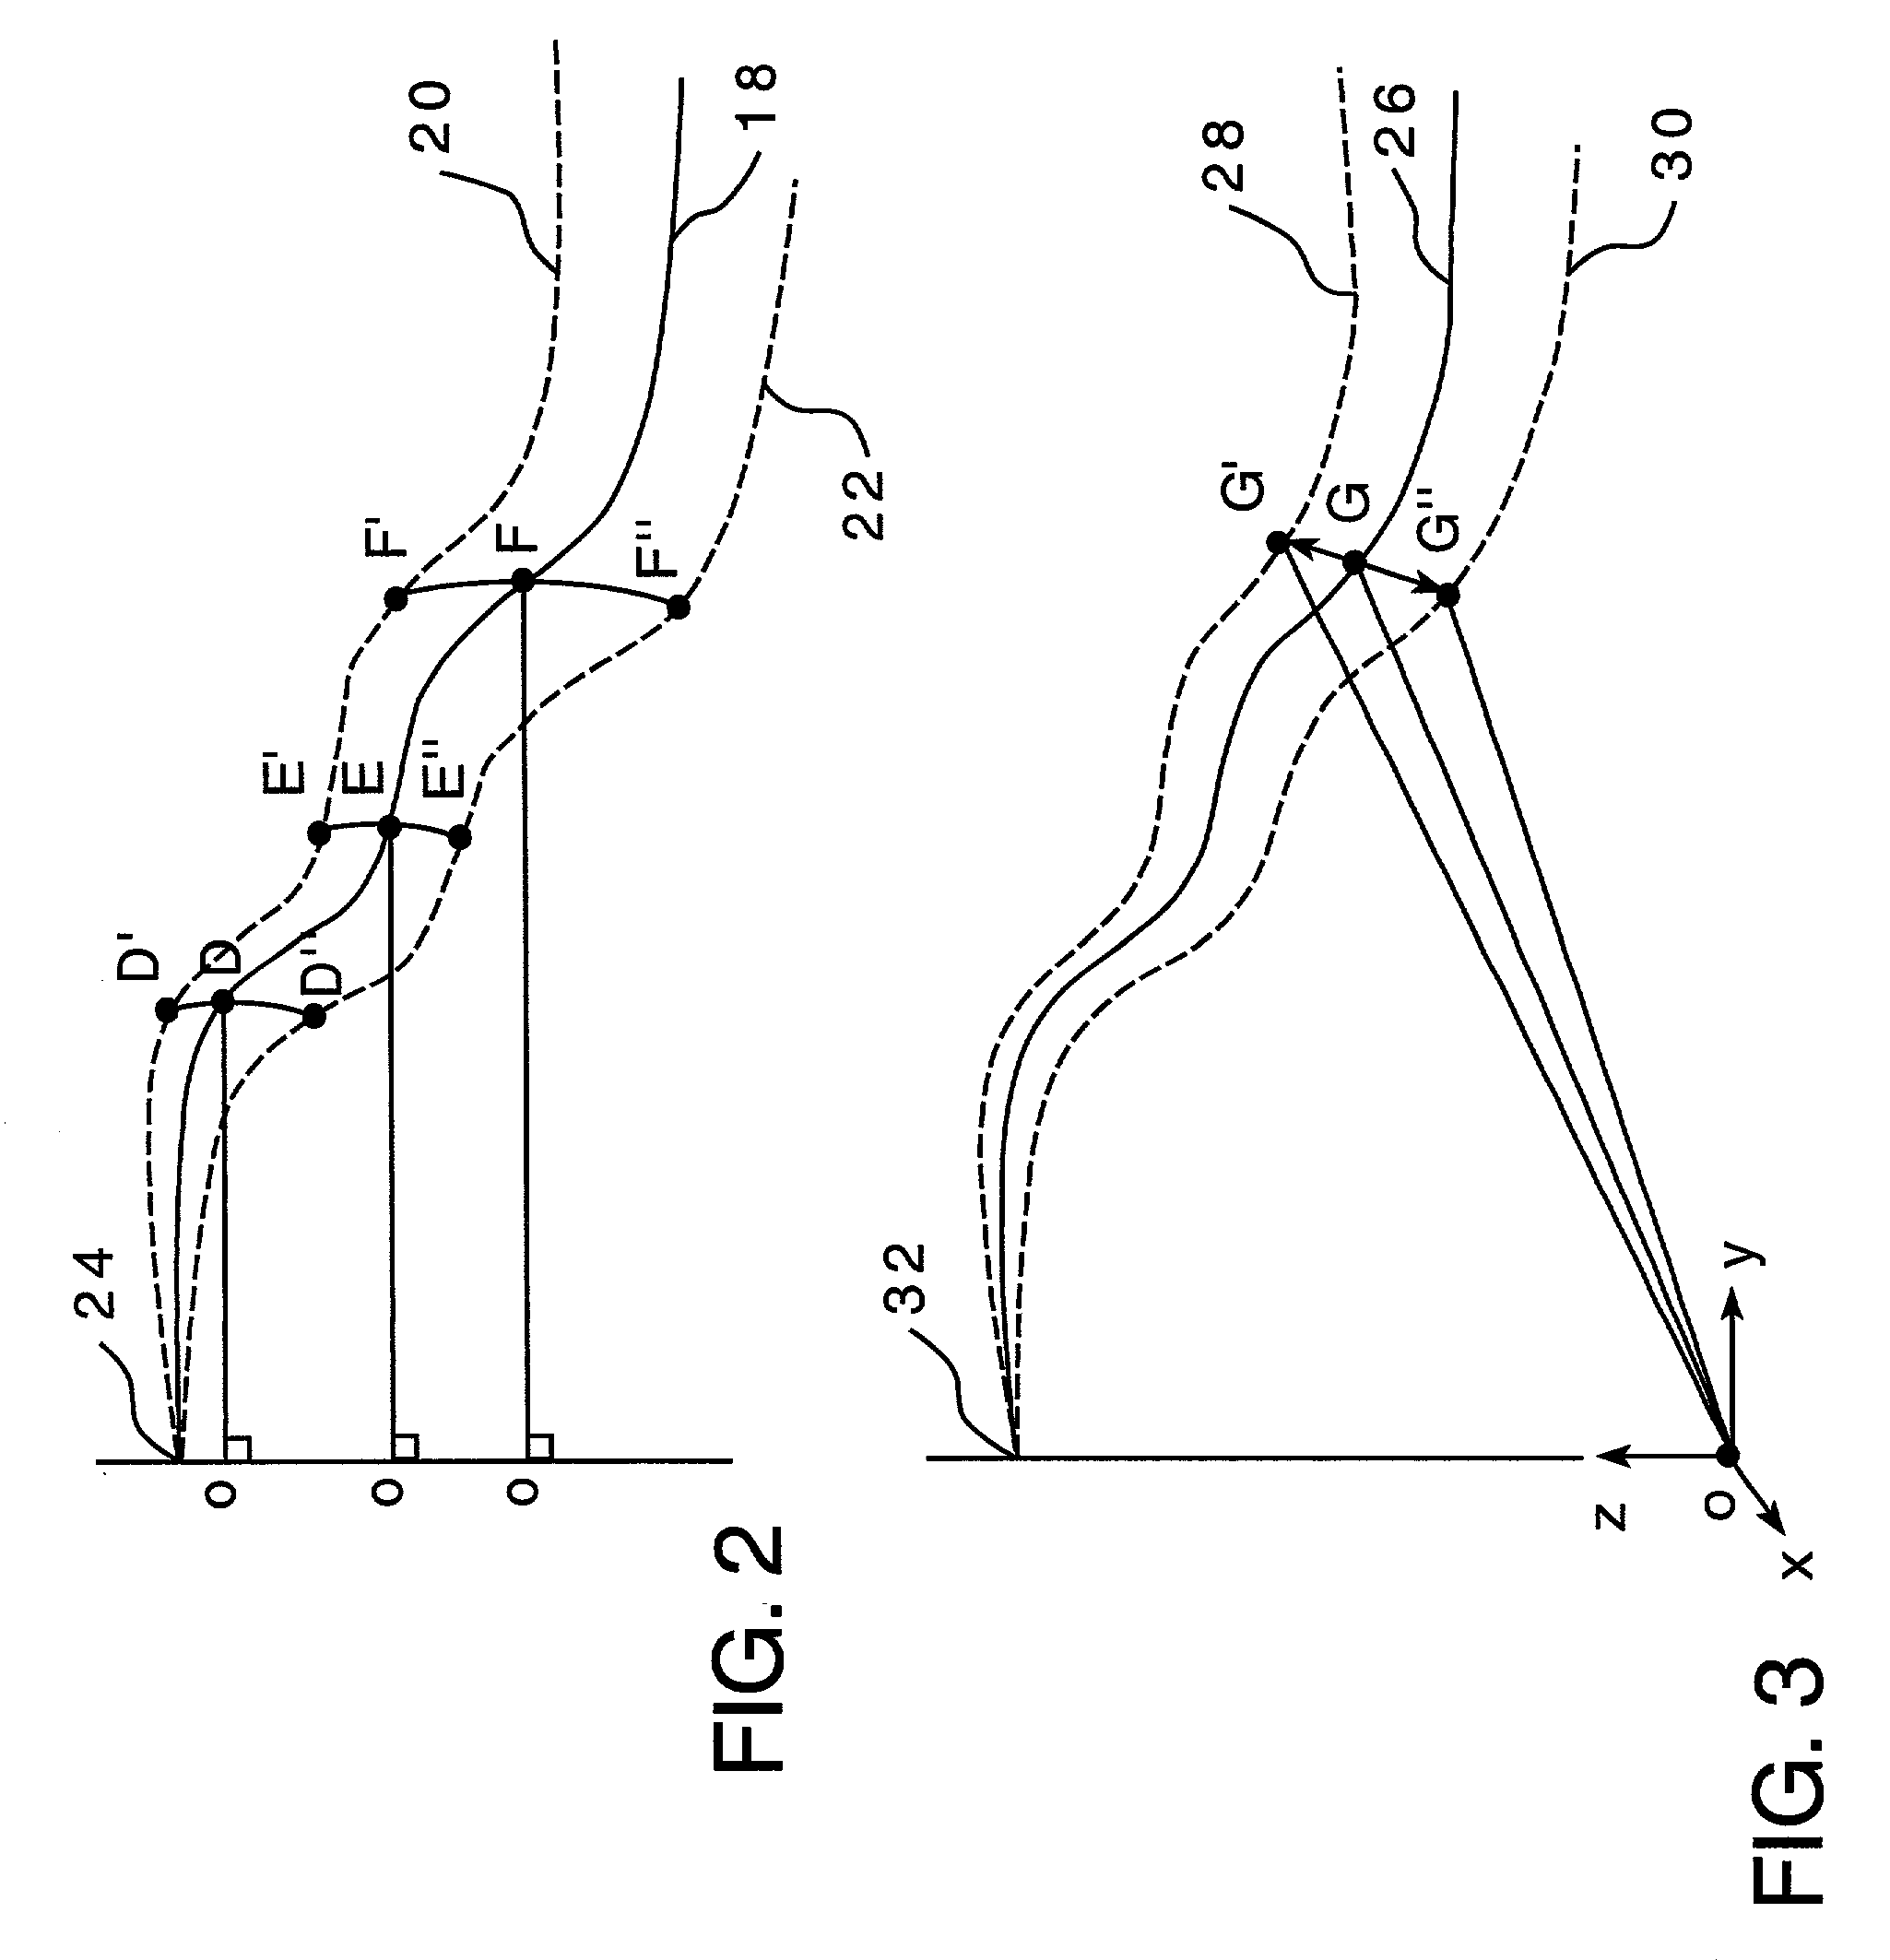 Method for determining a die profile for forming a metal part having a desired shape and associated methods